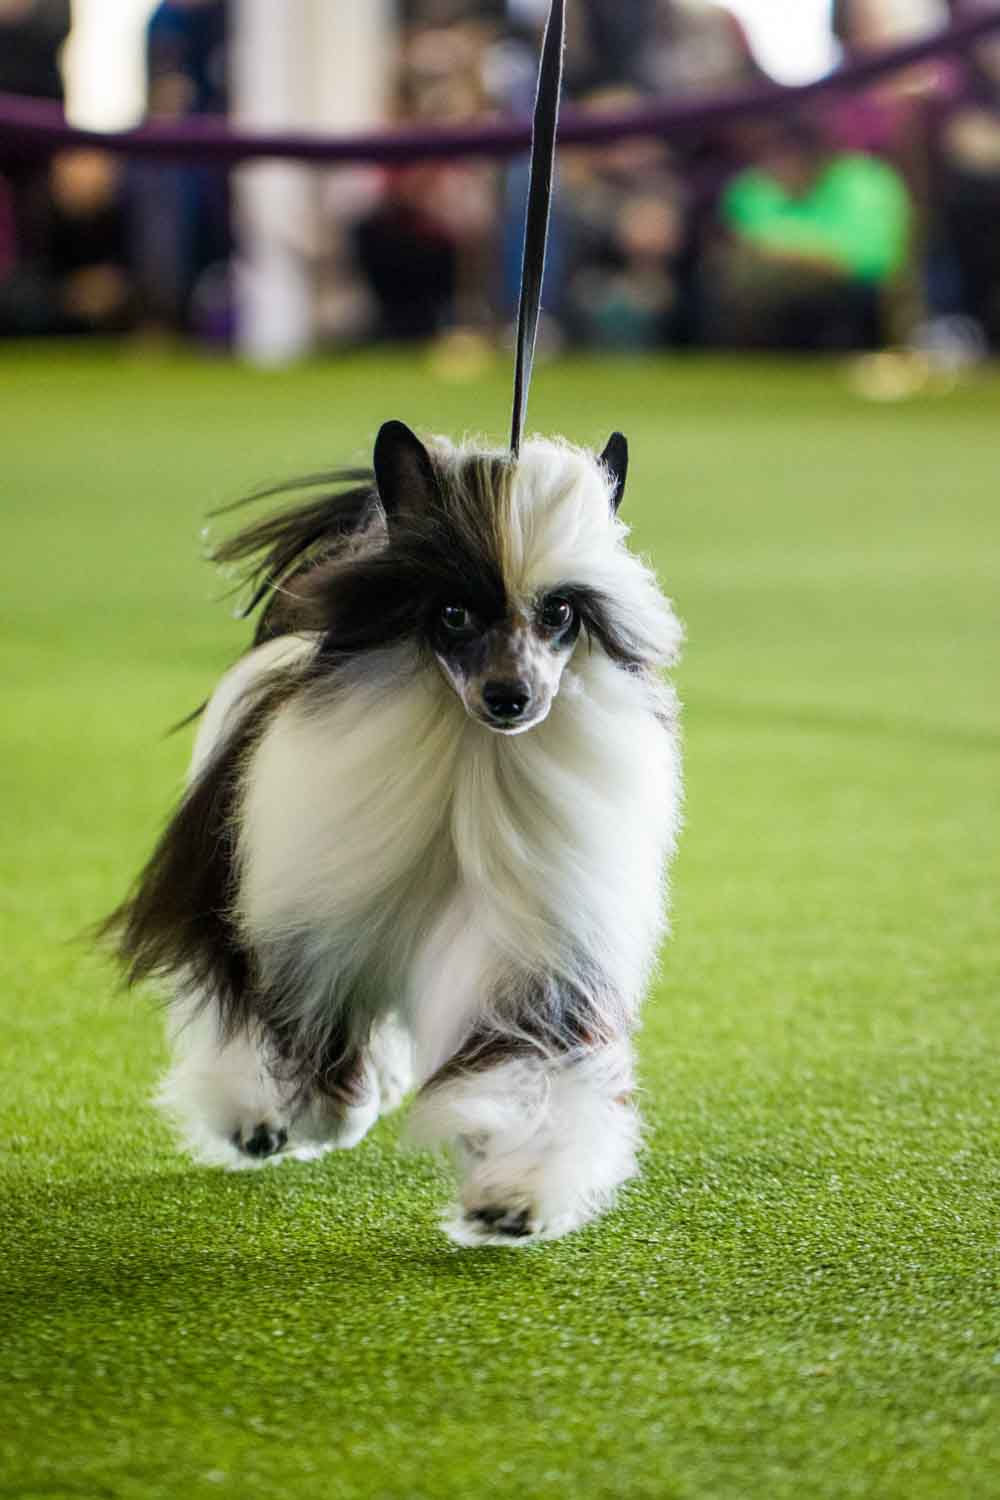 Chinese Crested (Photo: Natalie Siebers)